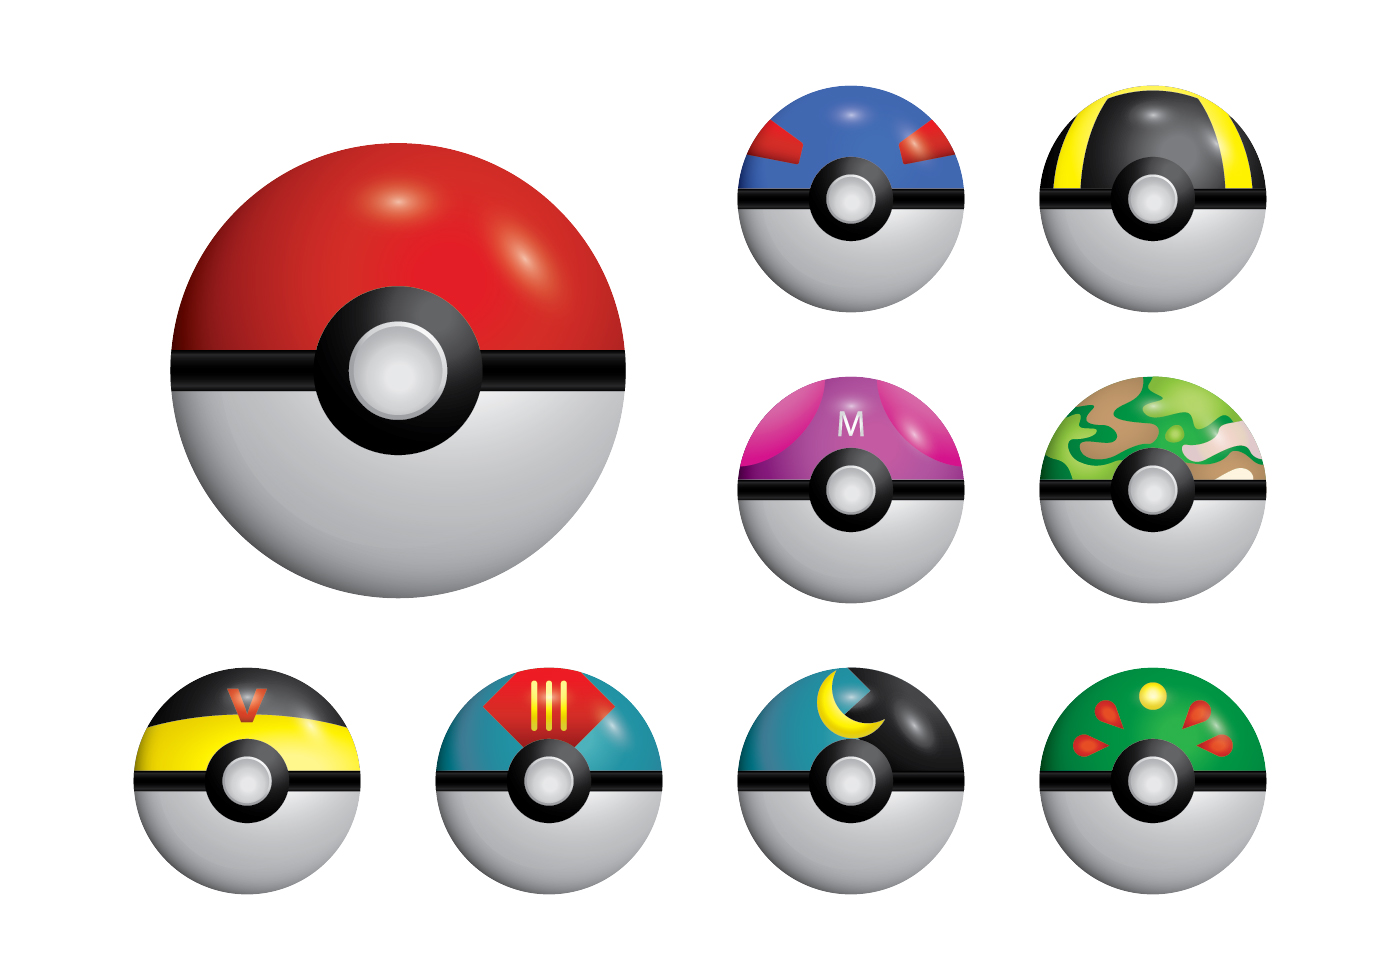 Browse 22 incredible Pokeballs vectors, icons, clipart graphics, and backgr...